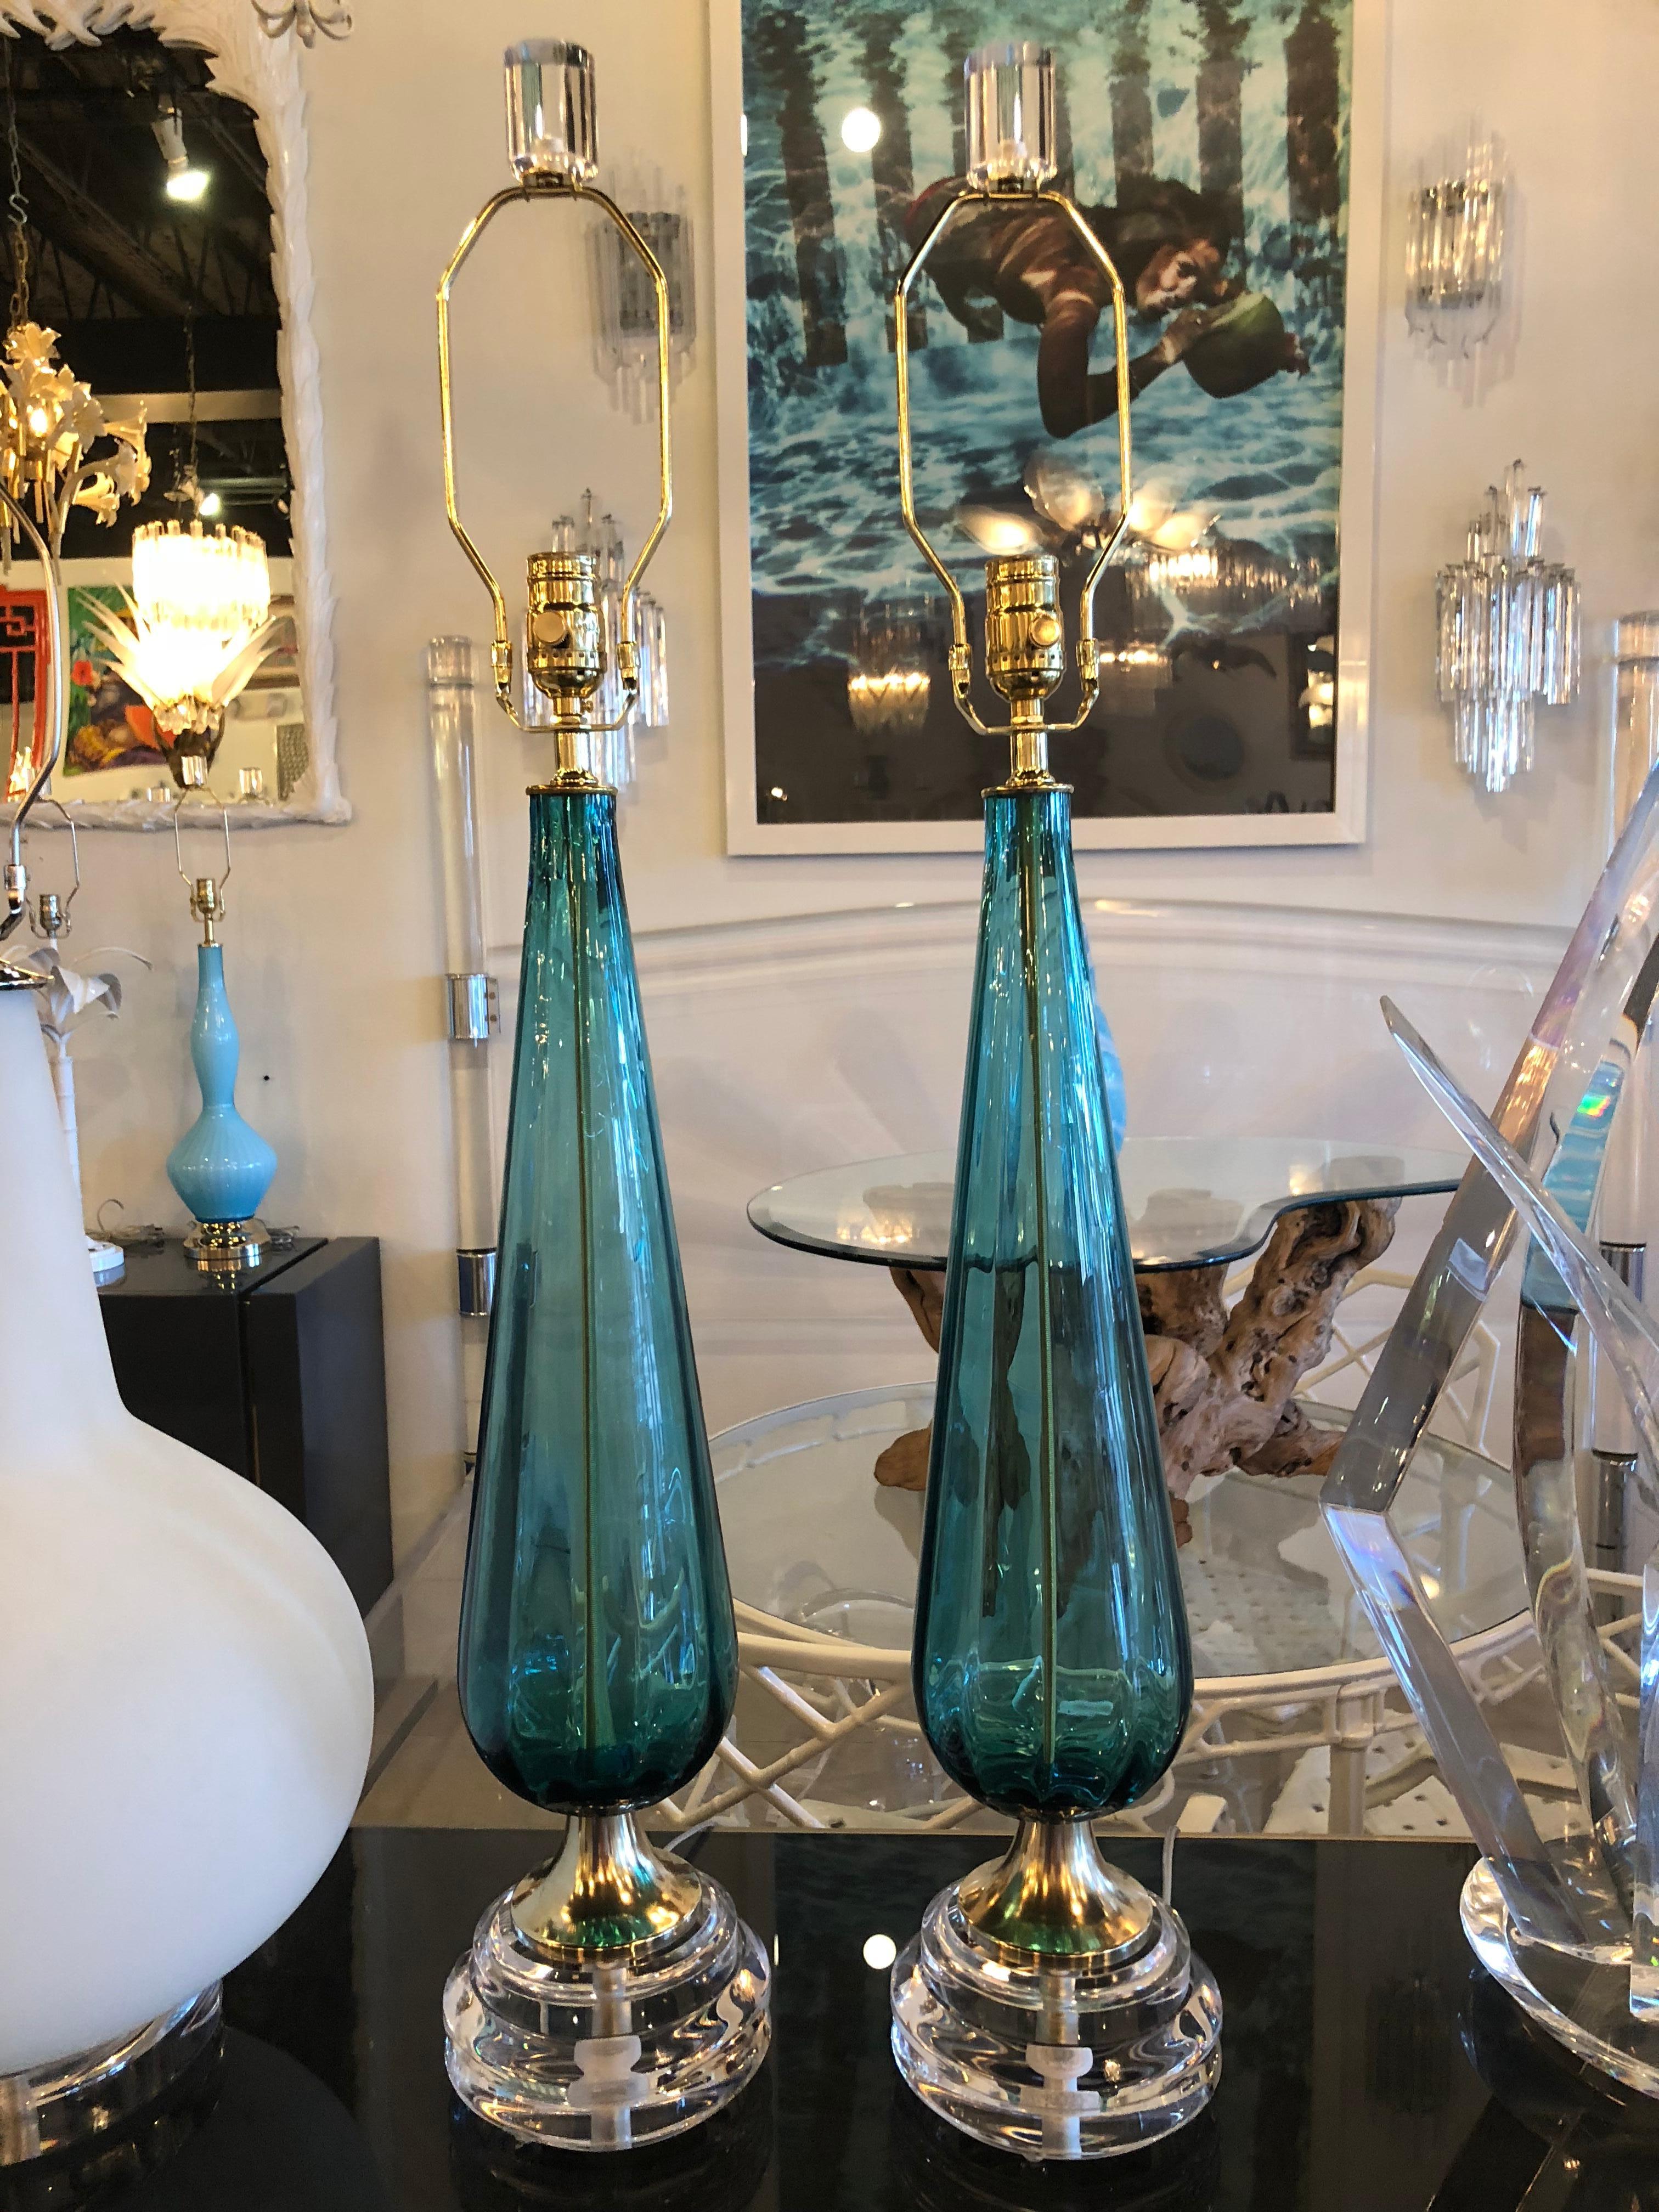 Vintage aqua blue turquoise glass table lamp by Murano. Completely restored. 3-way light, newly wired, new brass hardware, Lucite base and finial, original brass base that has been polished.
36” tall to top of finial.